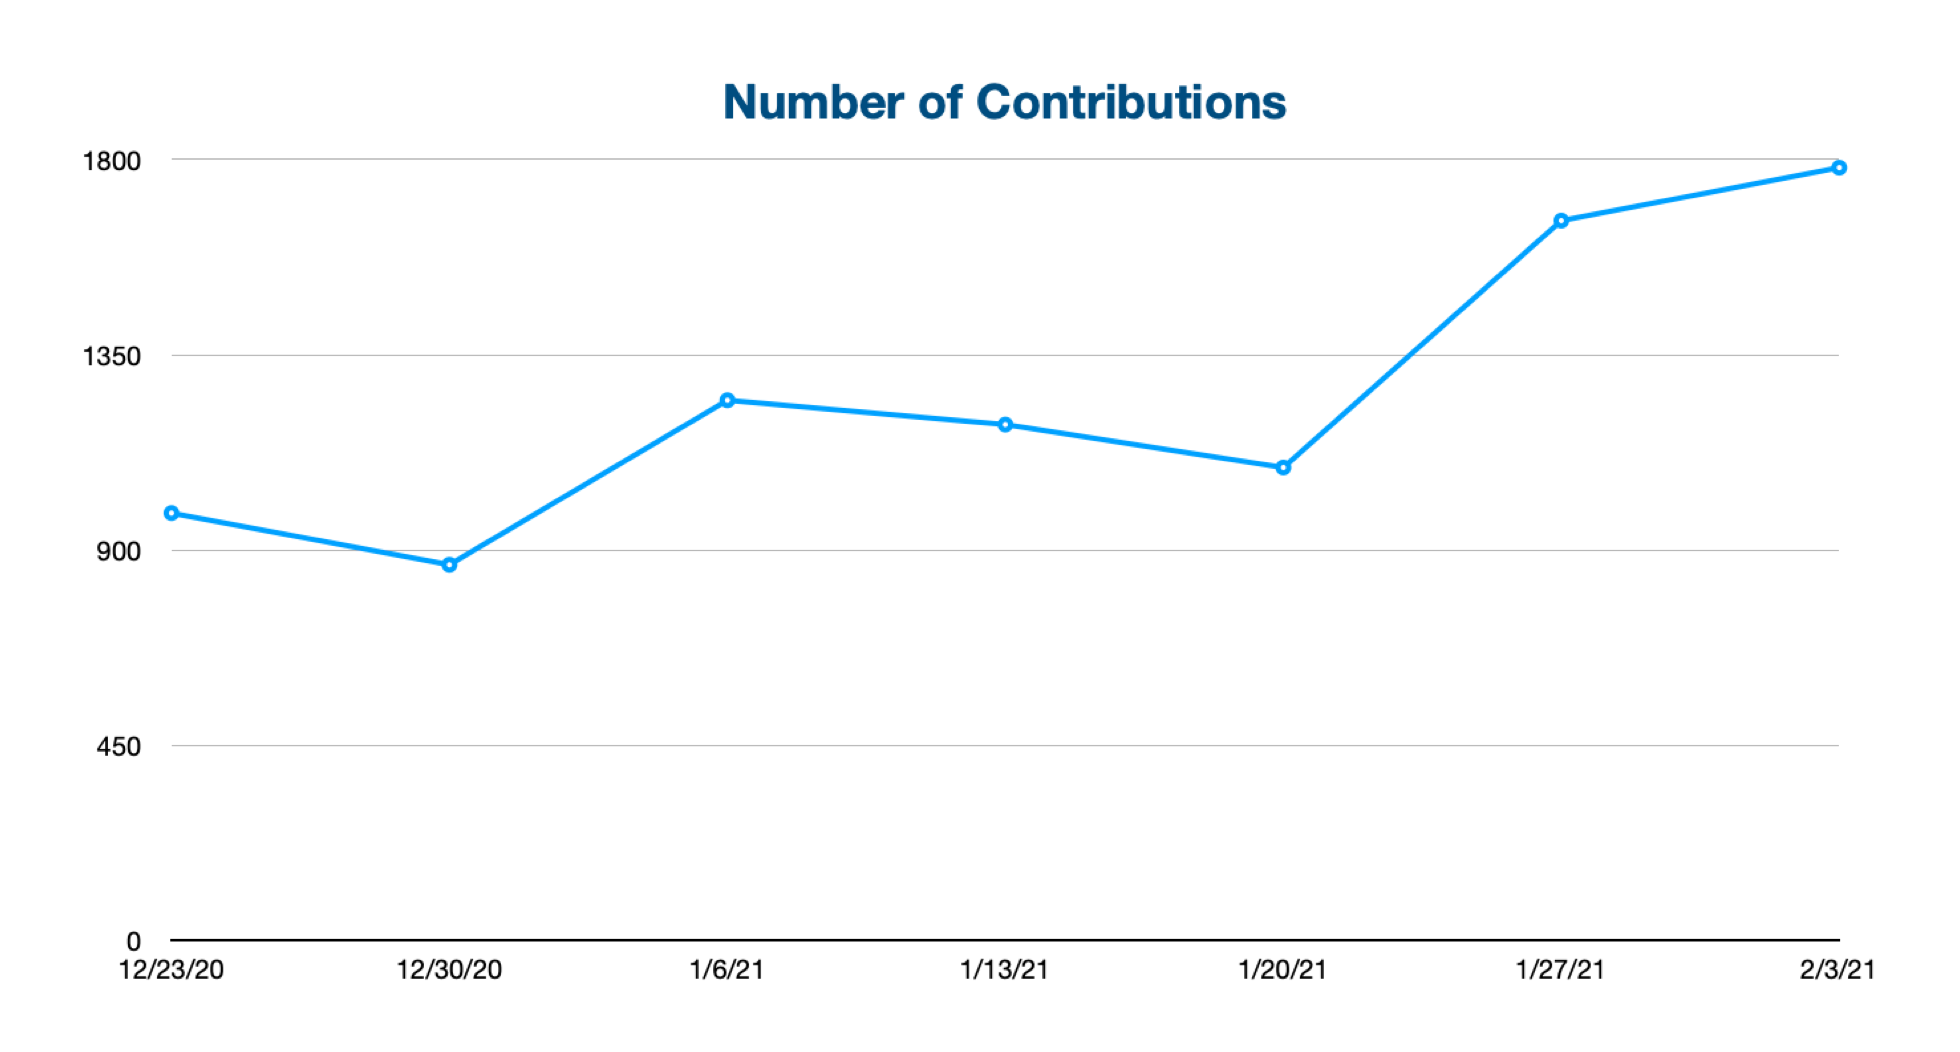 Chart of total number of contributions over time.